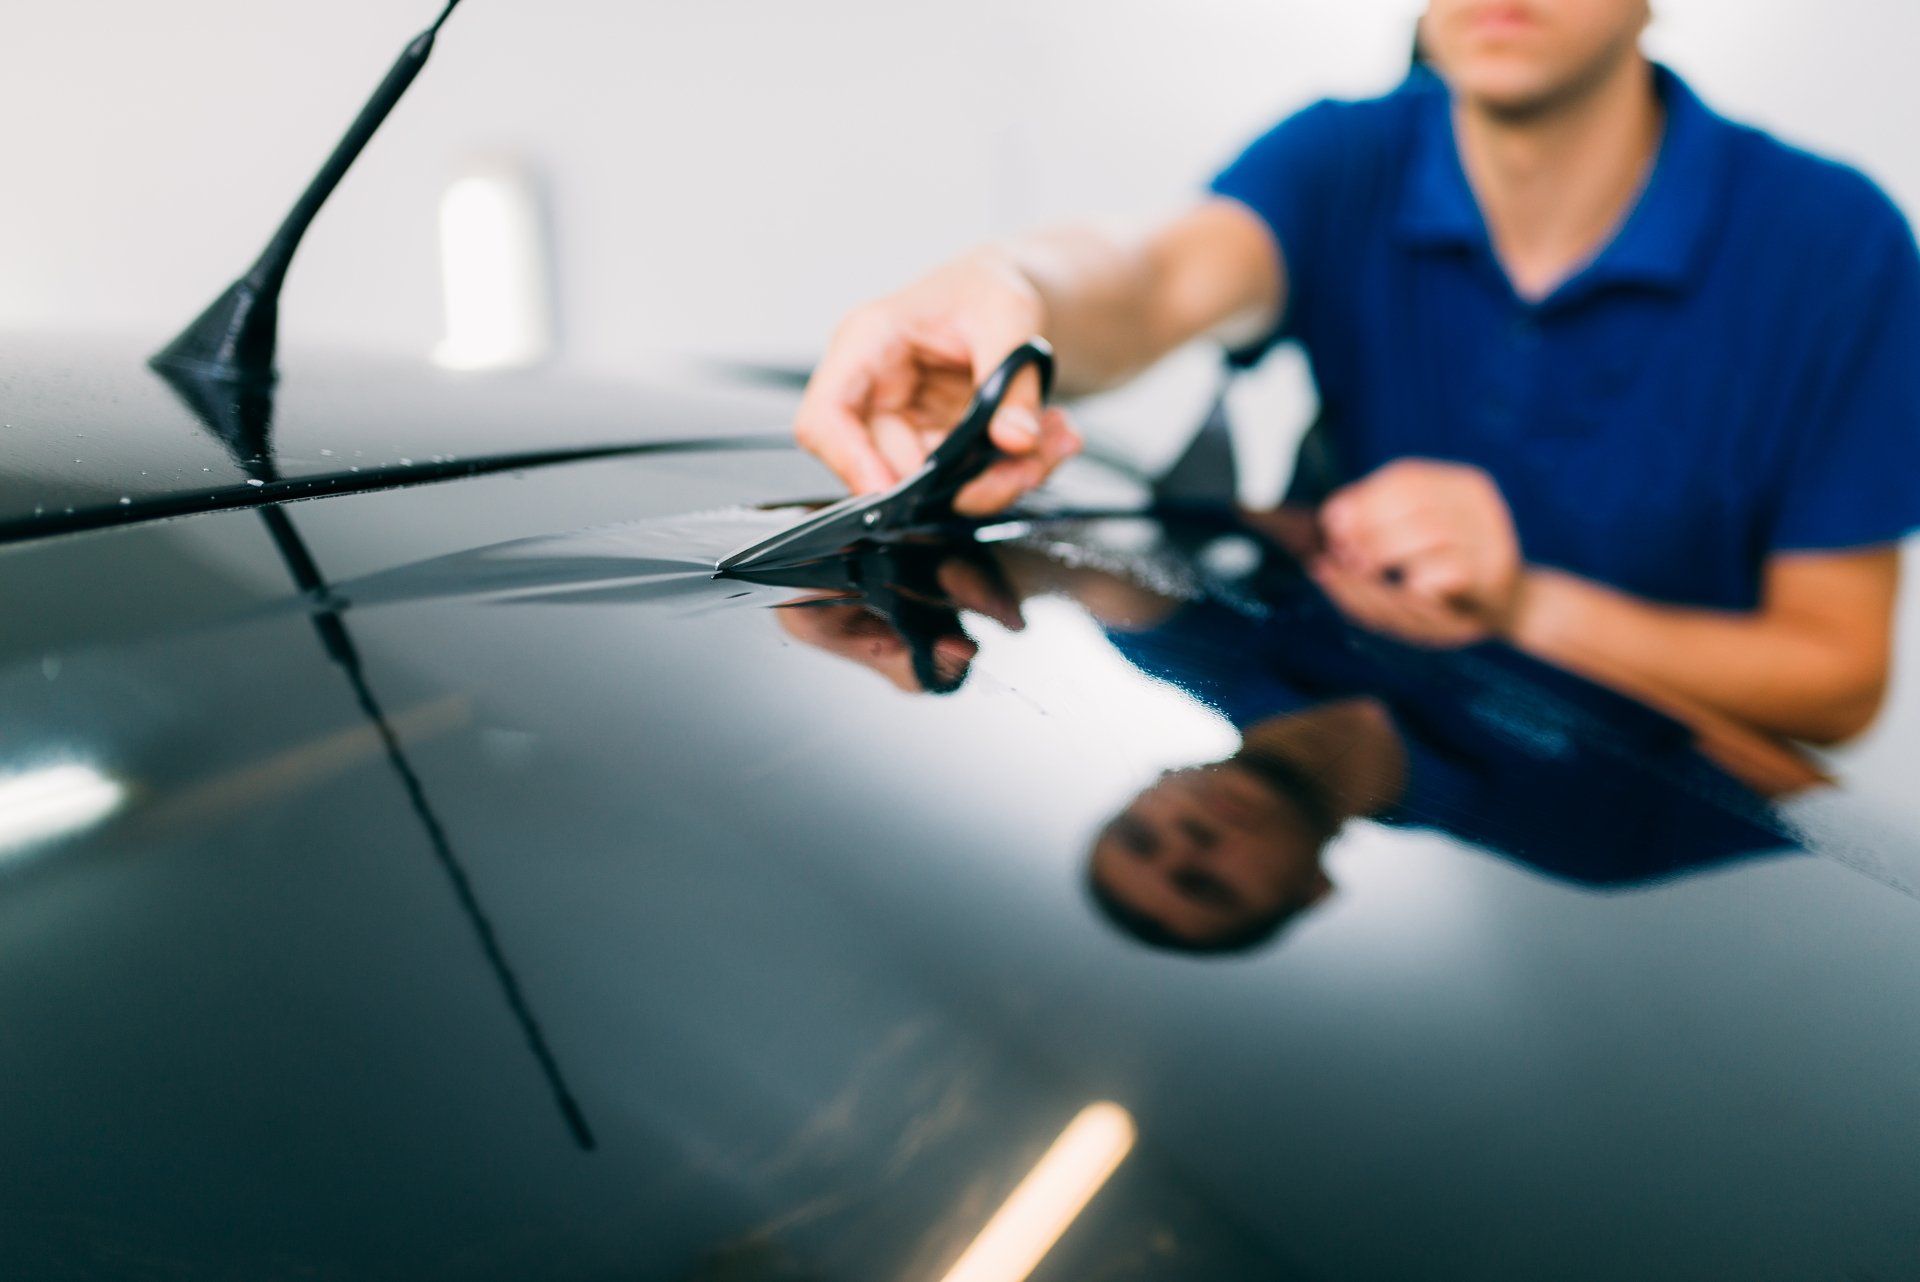 Car Window Tinting: 7 Potential Benefits for Your Vehicle